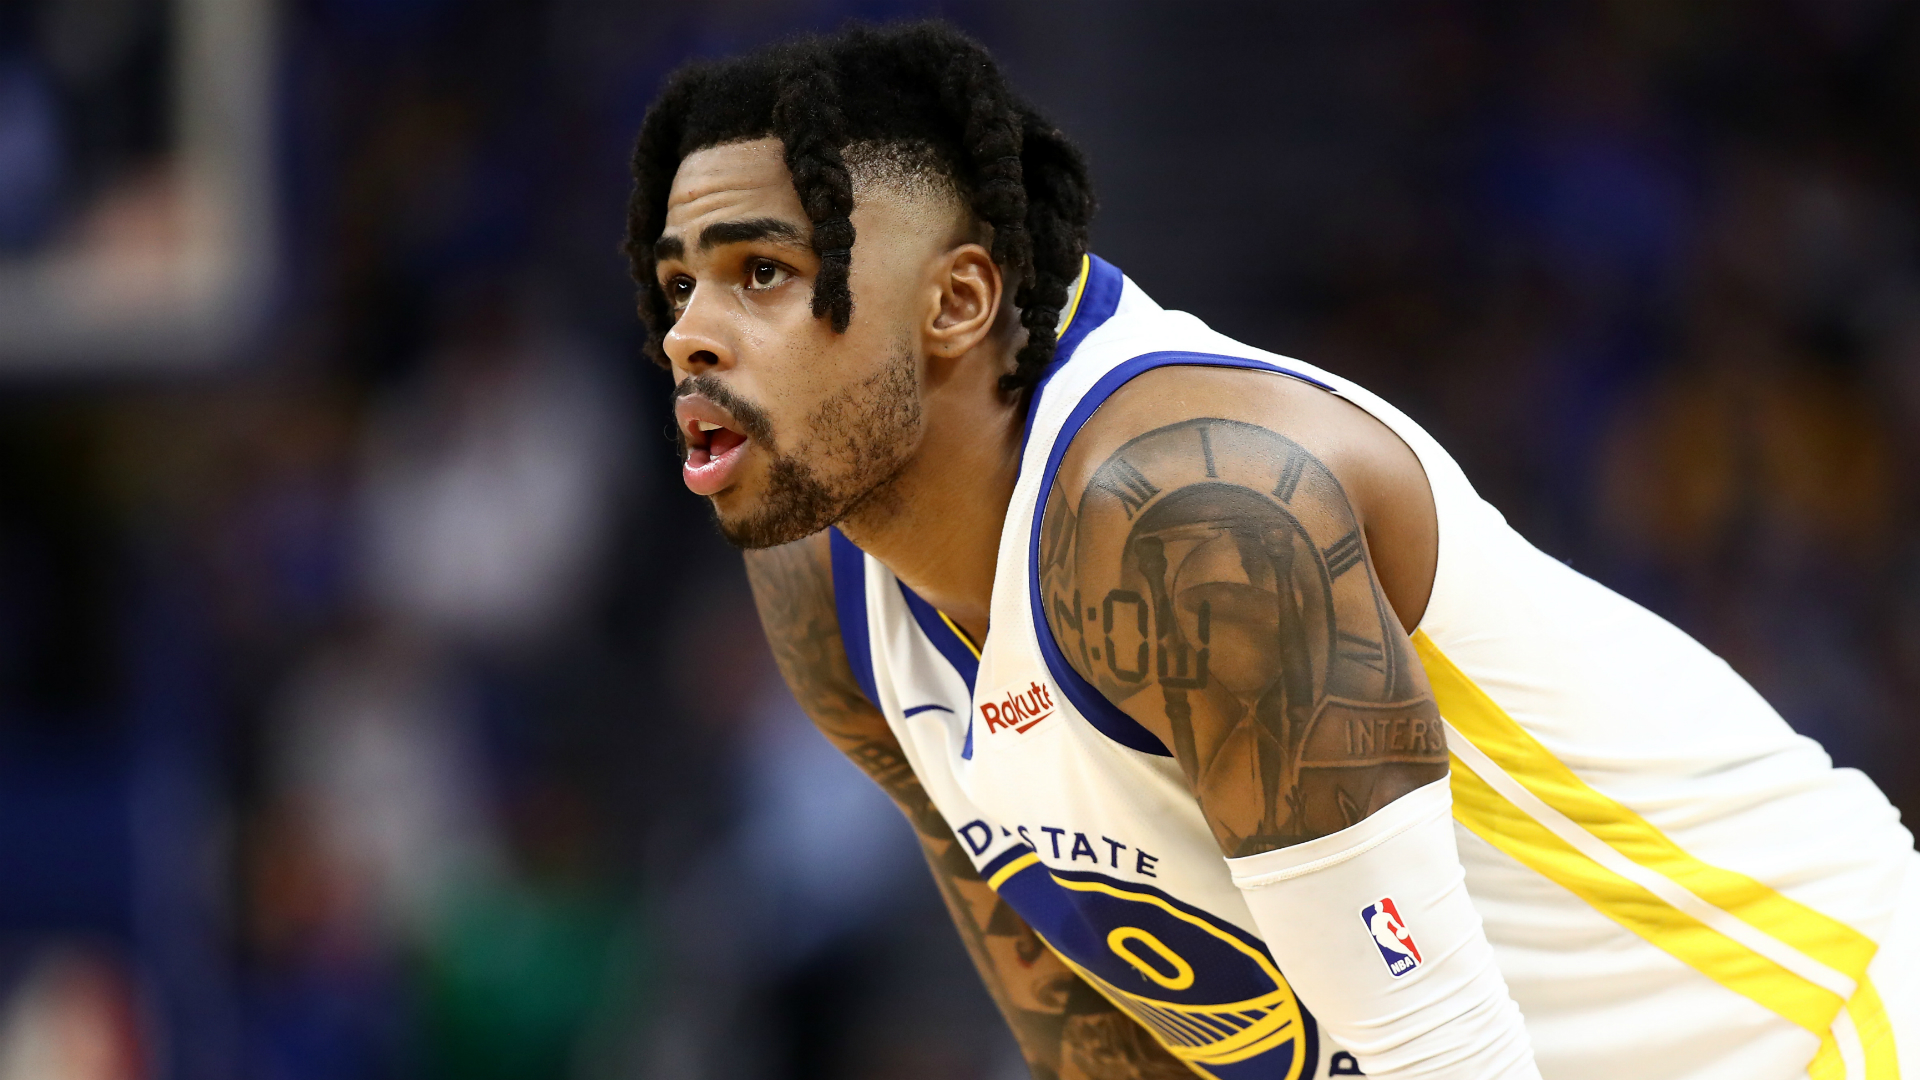 The Golden State Warriors confirmed the sprain on Saturday, with D'Angelo Russell to be re-evaluated in a fortnight.